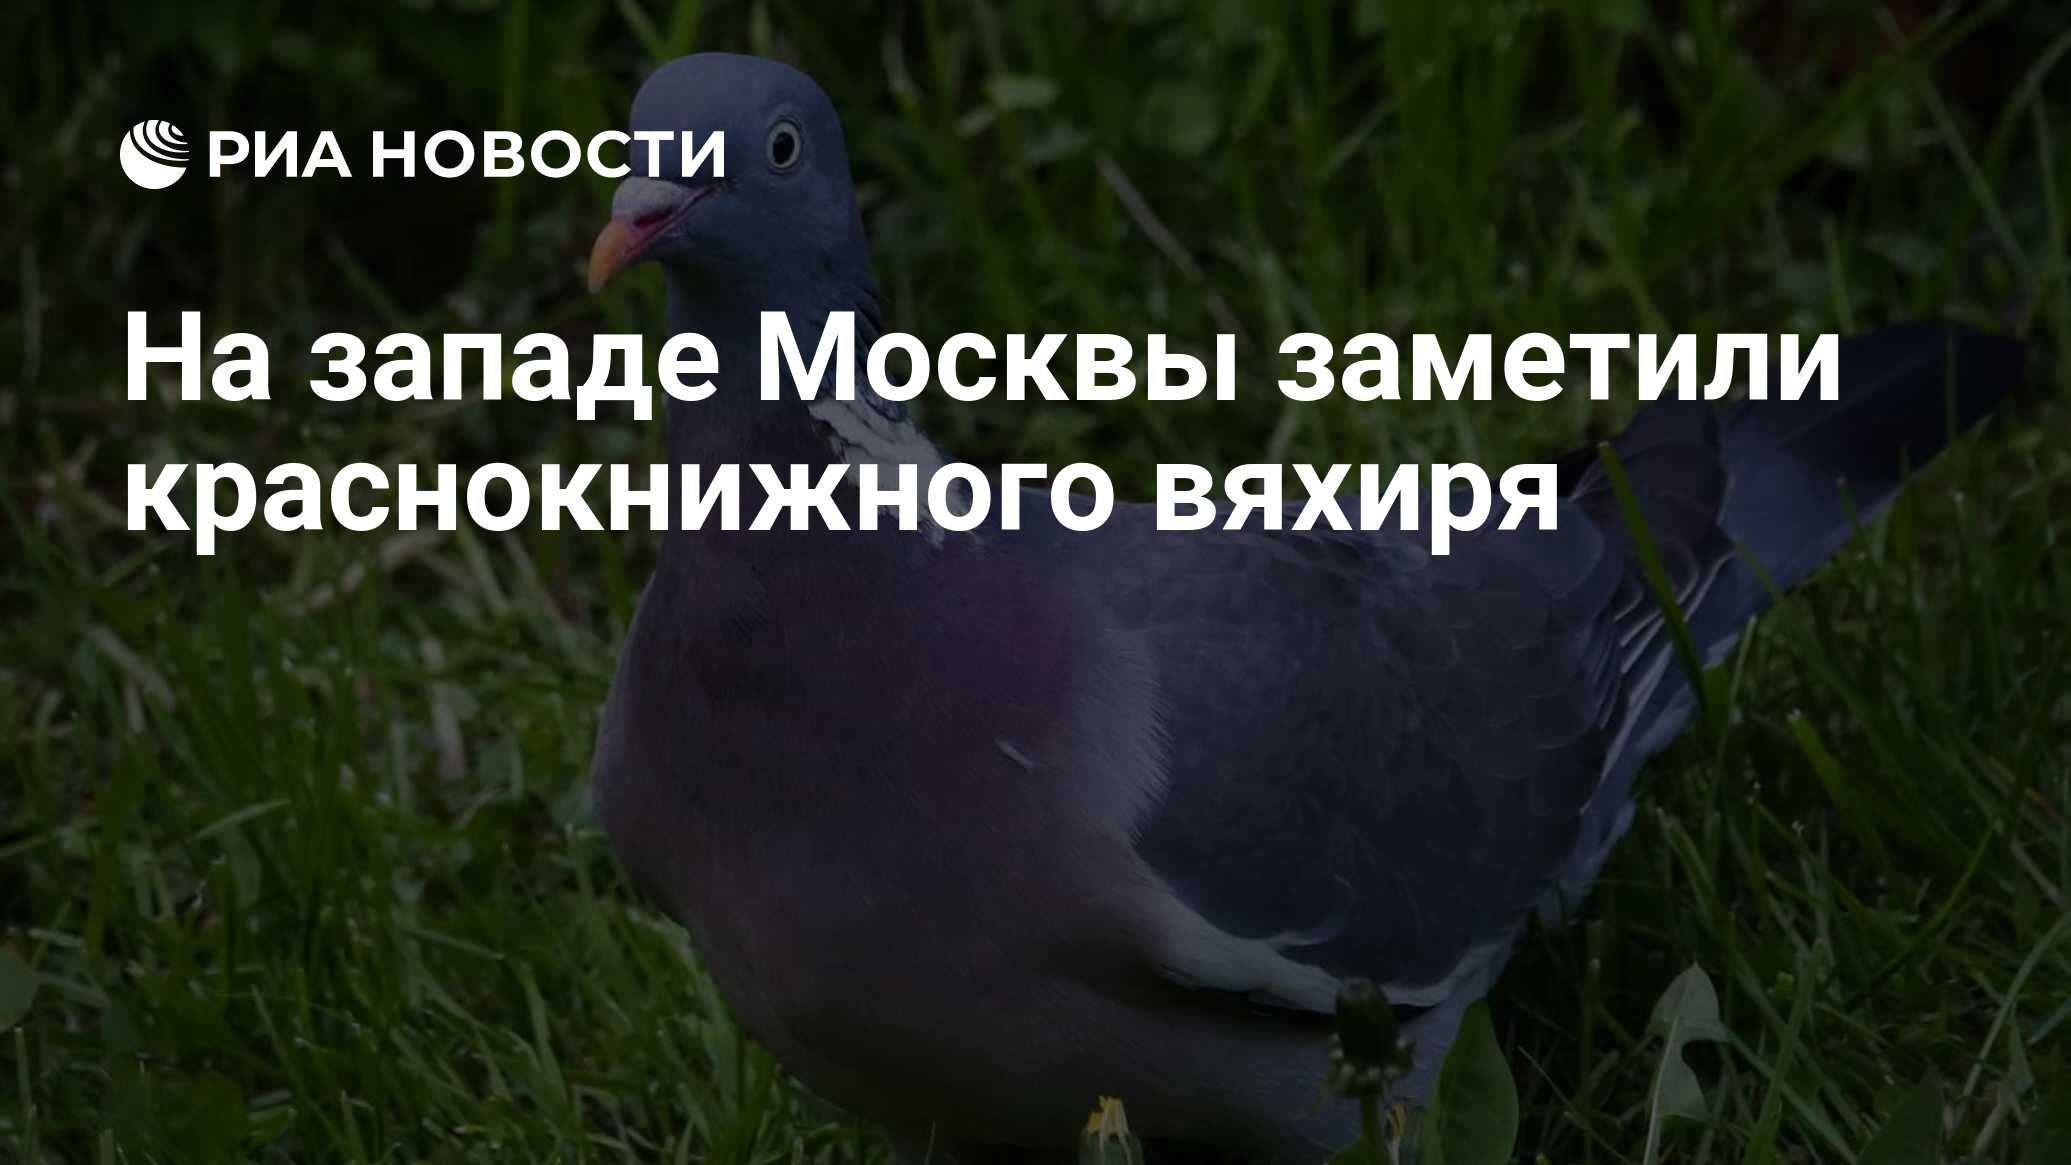 In the west of Moscow, a red-listed dove was noticed